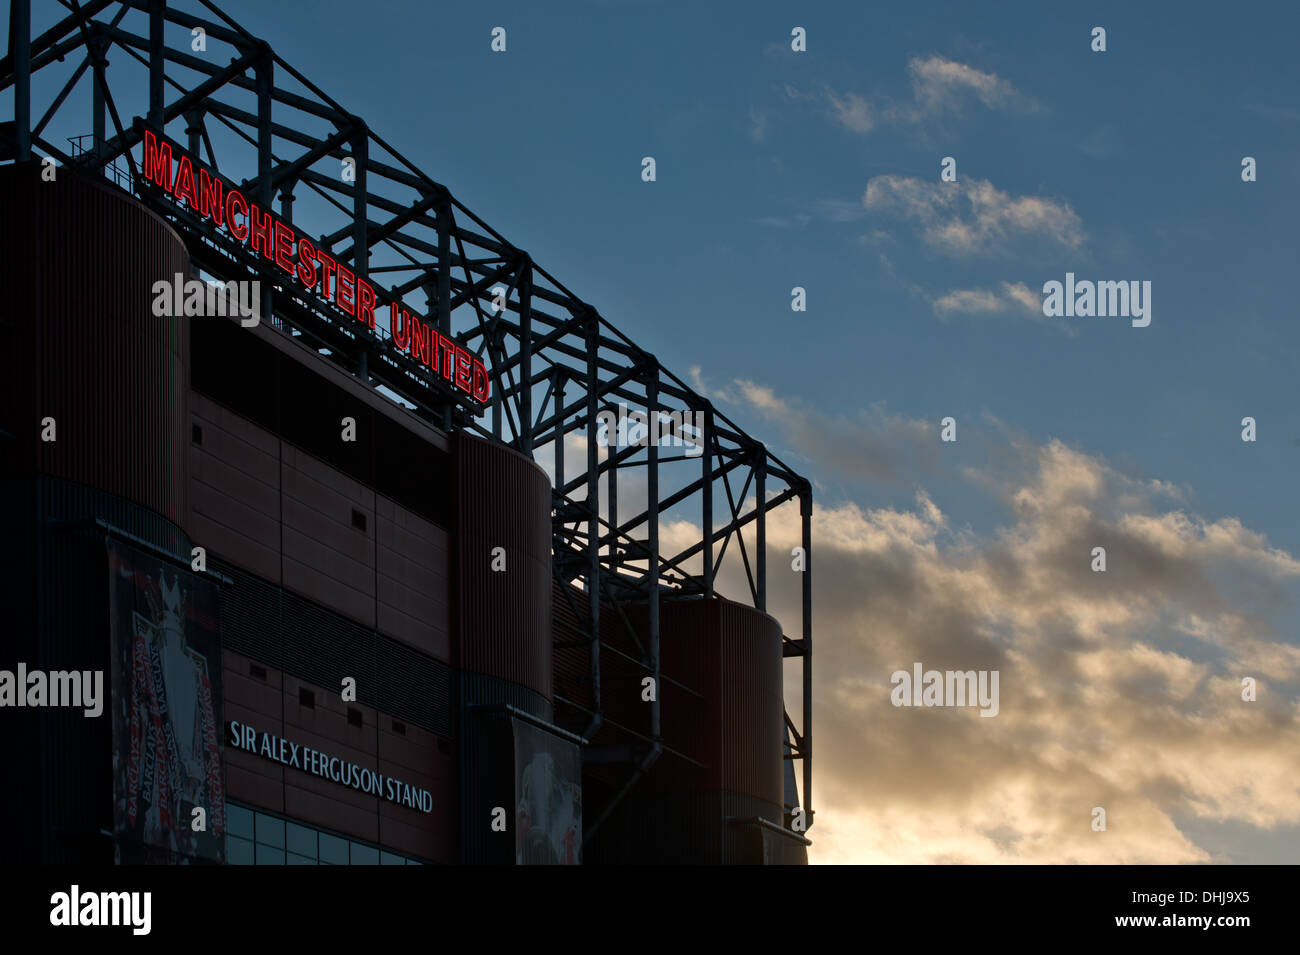 A near silhouette of the Alex Ferguson stand of Old Trafford, home of Manchester United, sunset background (Editorial use only). Stock Photo